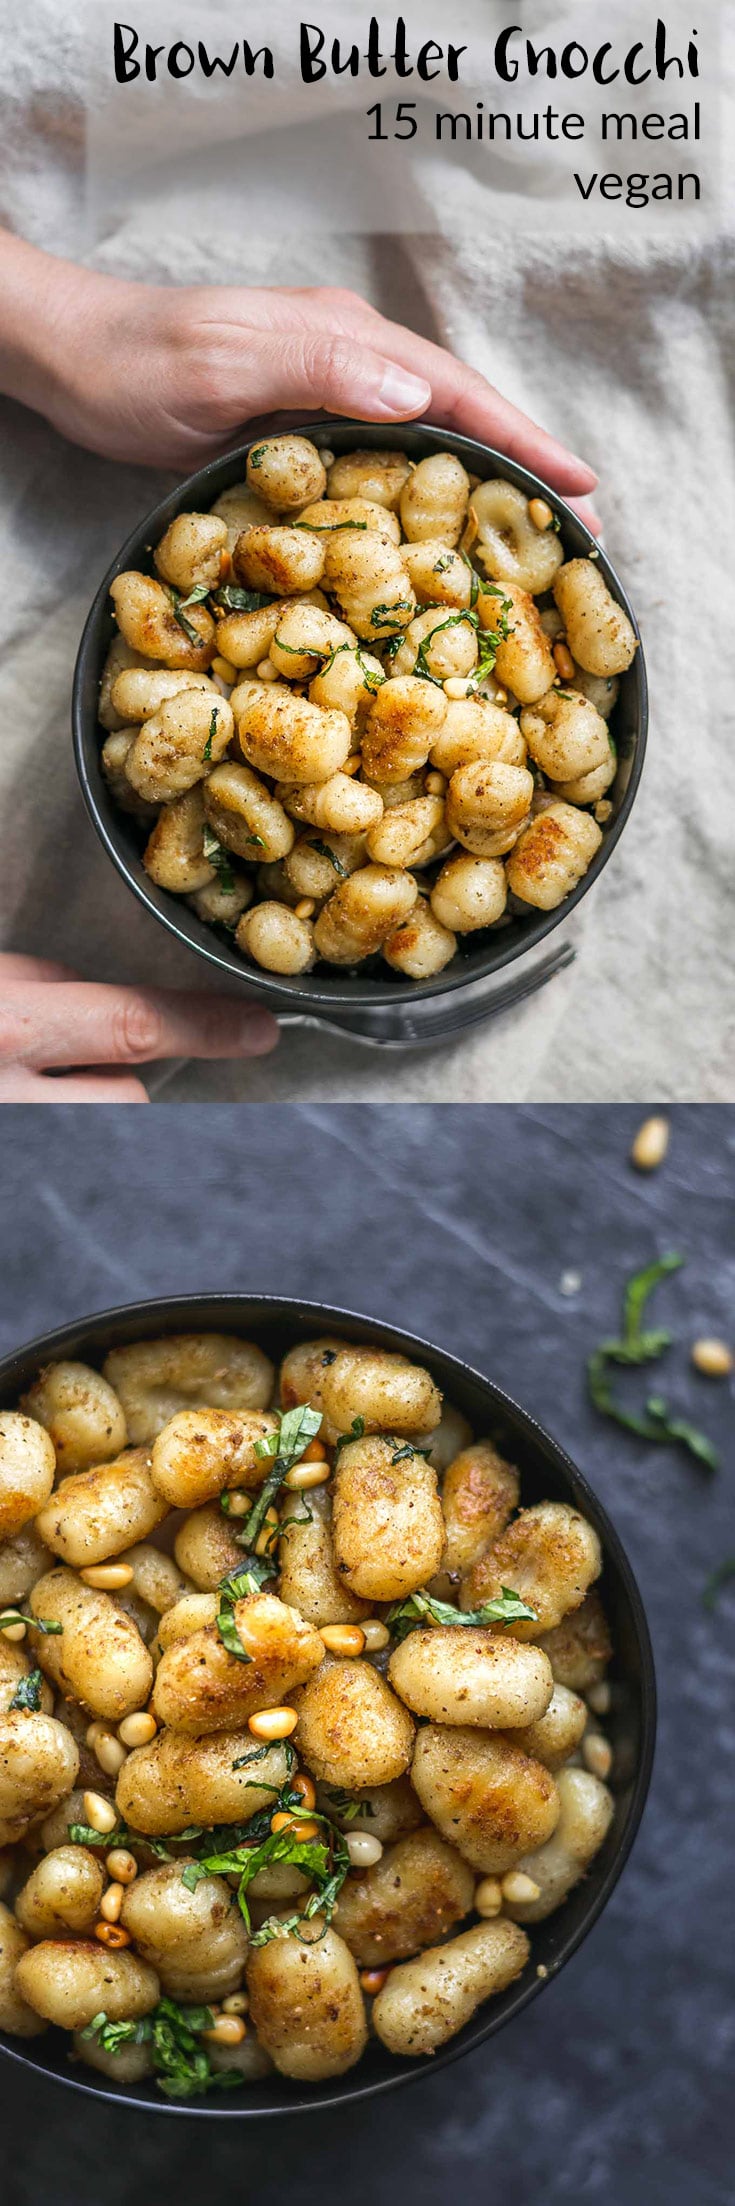 Vegan Brown Butter Gnocchi | Gnocchi are pan fried in vegan brown butter and tossed with dried sage, toasted pine nuts, and thinly sliced caramelized garlic in this delicious 8-ingredient and 15-minute meal. | thecuriouschickpea.com #vegan #Italian #gnocchi #pasta #veganpasta